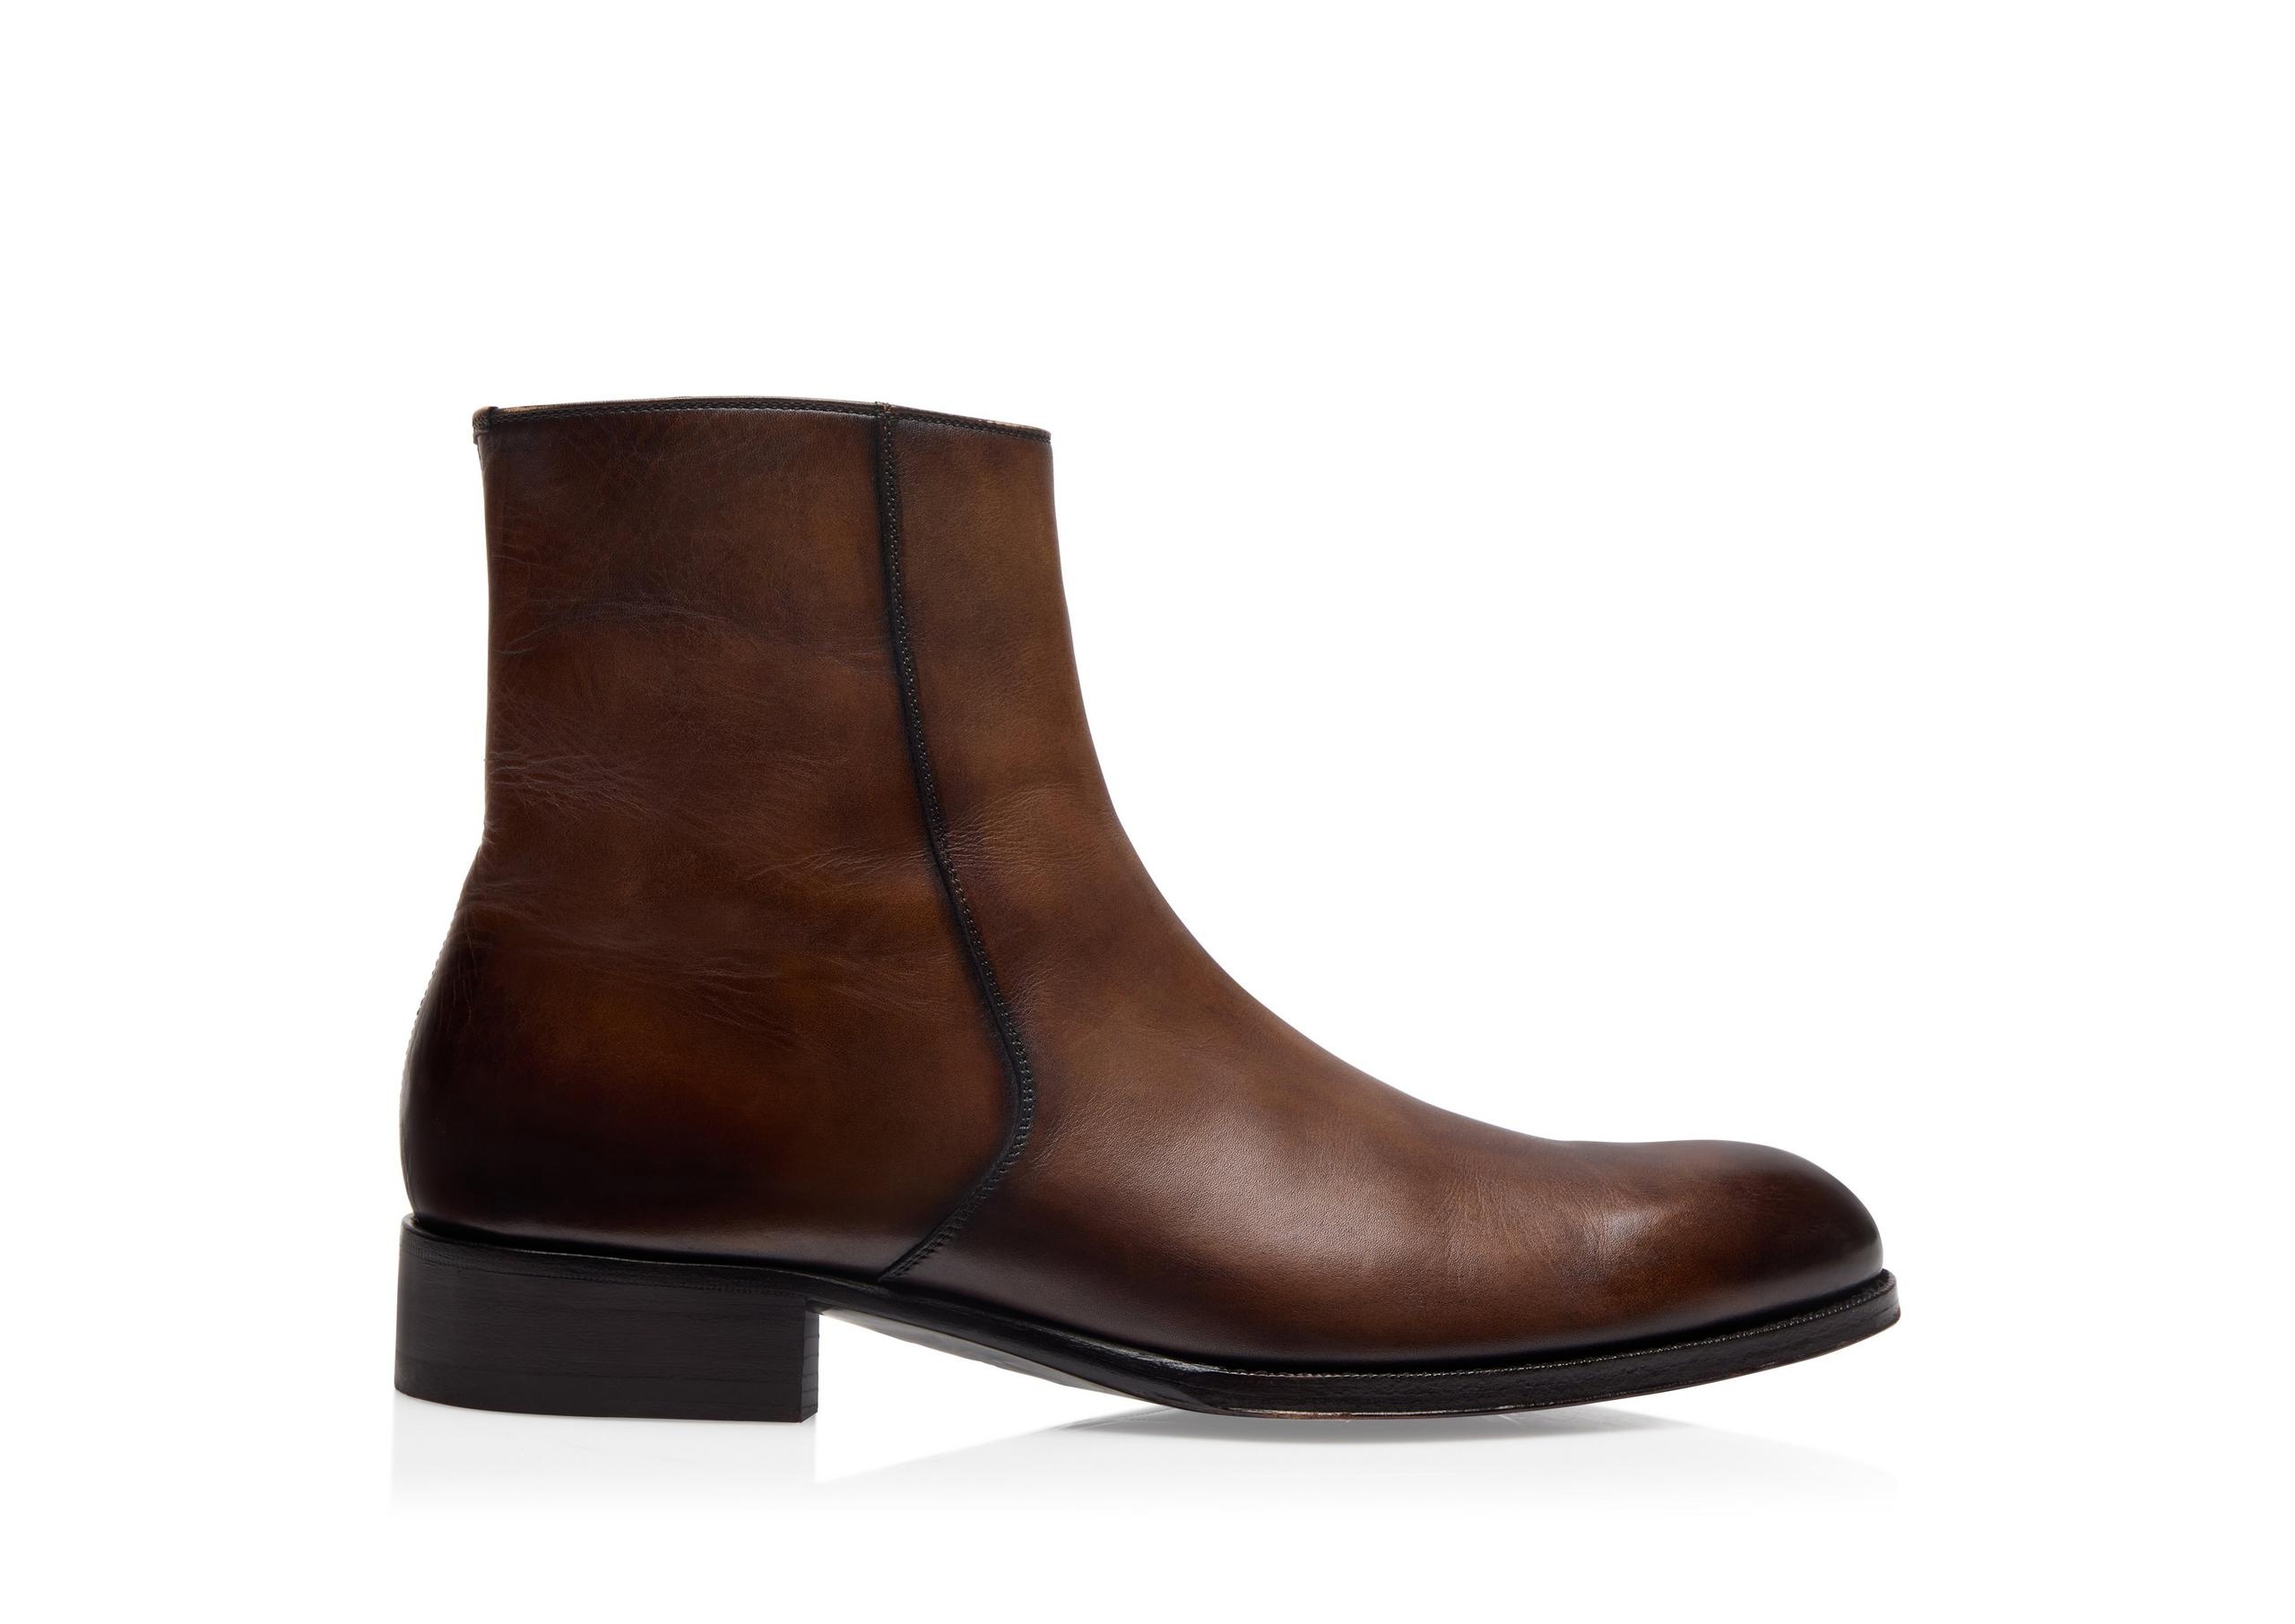 BURNISHED LEATHER EDGAR ZIP BOOT - 1